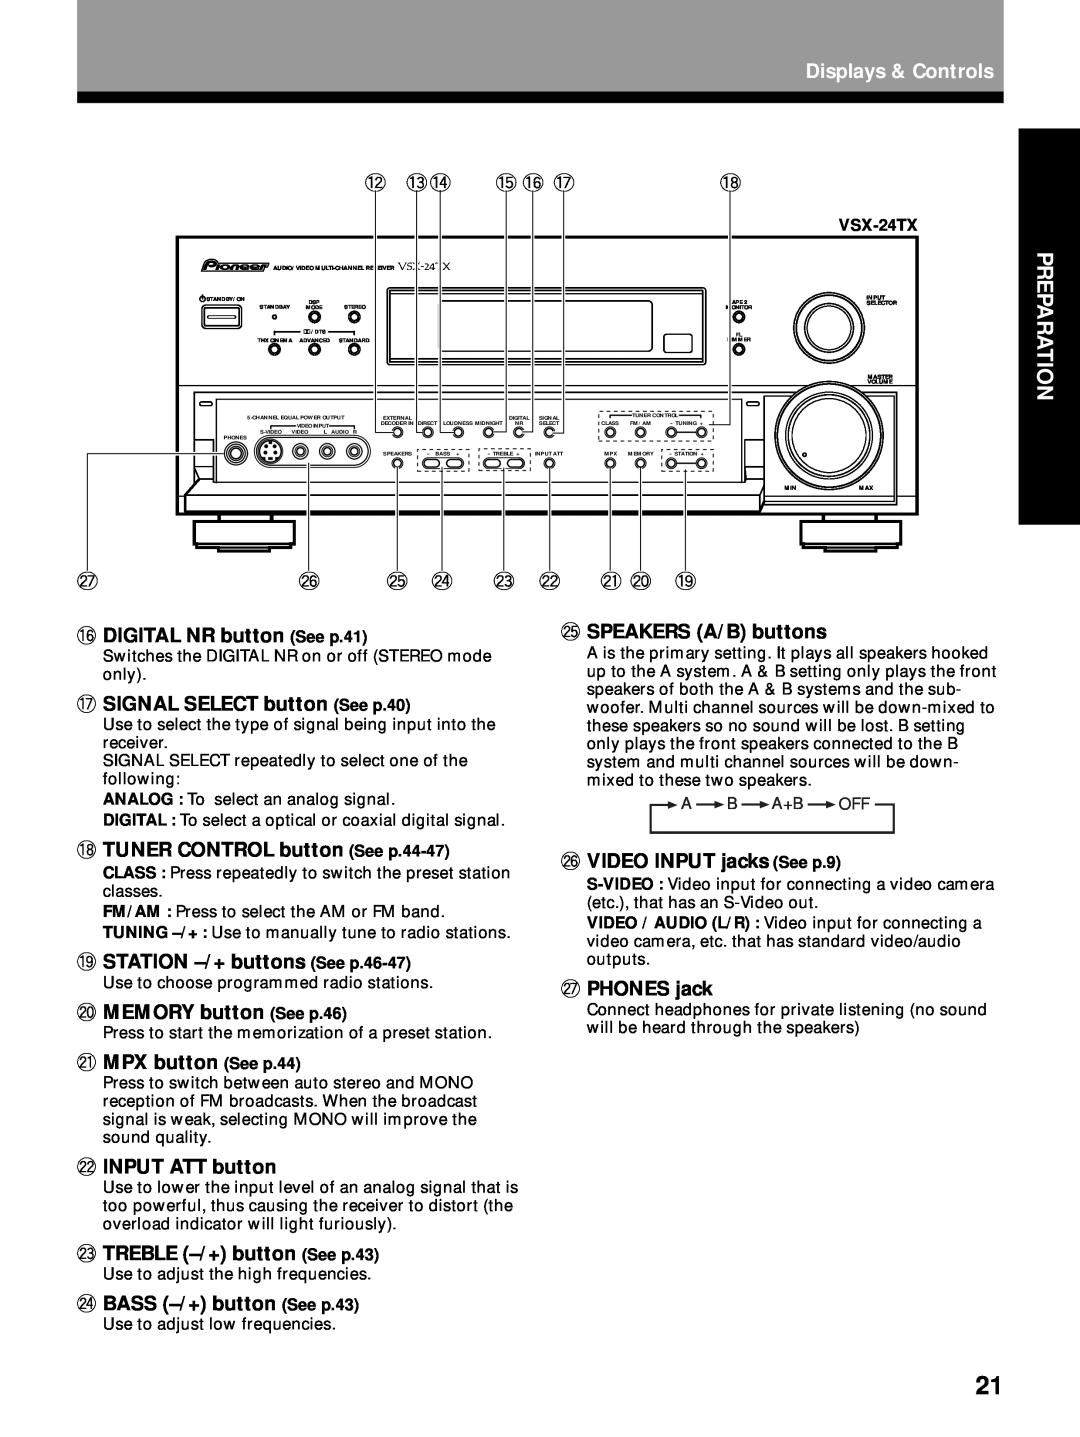 Pioneer VSX-27TX manual # DIGITAL NR button See p.41, + SPEAKERS A/B buttons, $ SIGNAL SELECT button See p.40, ªPHONES jack 